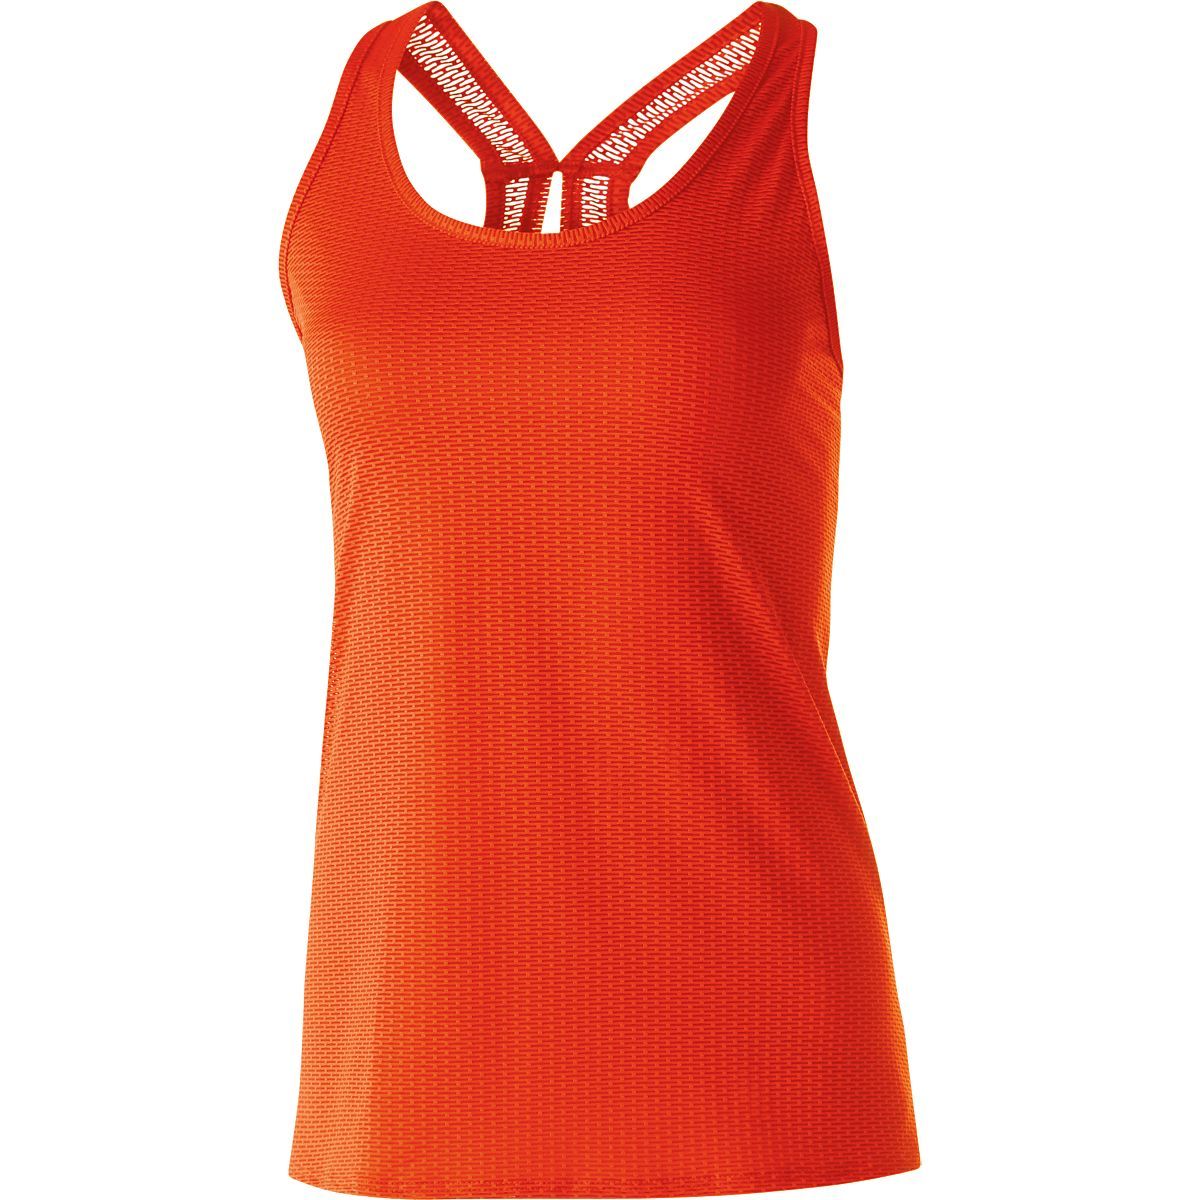 Holloway Ladies Precision Tank in Bright Orange  -Part of the Ladies, Ladies-Tank, Holloway, Shirts product lines at KanaleyCreations.com